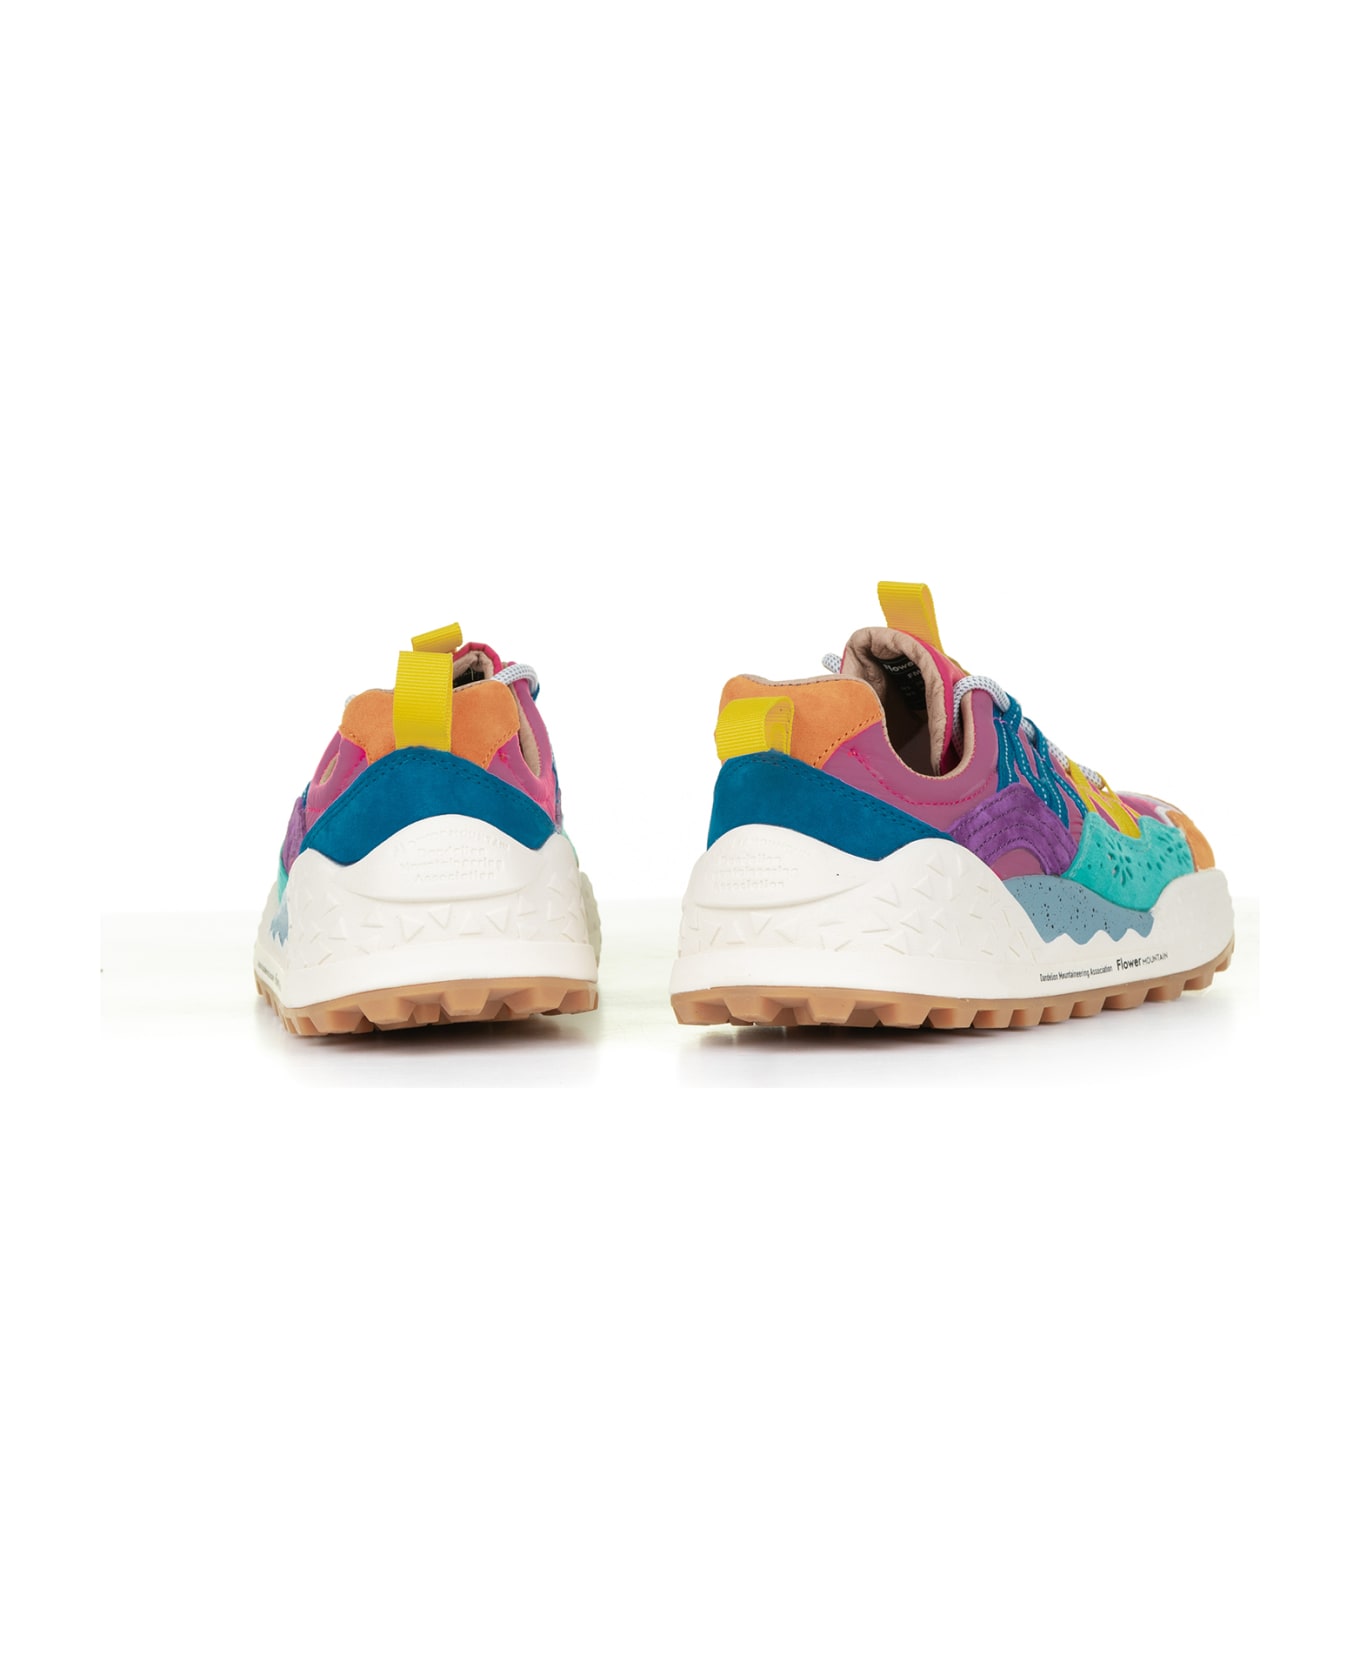 Flower Mountain Multicolored Washi Sneakers In Suede And Nylon - ORANGE GREEN PINK